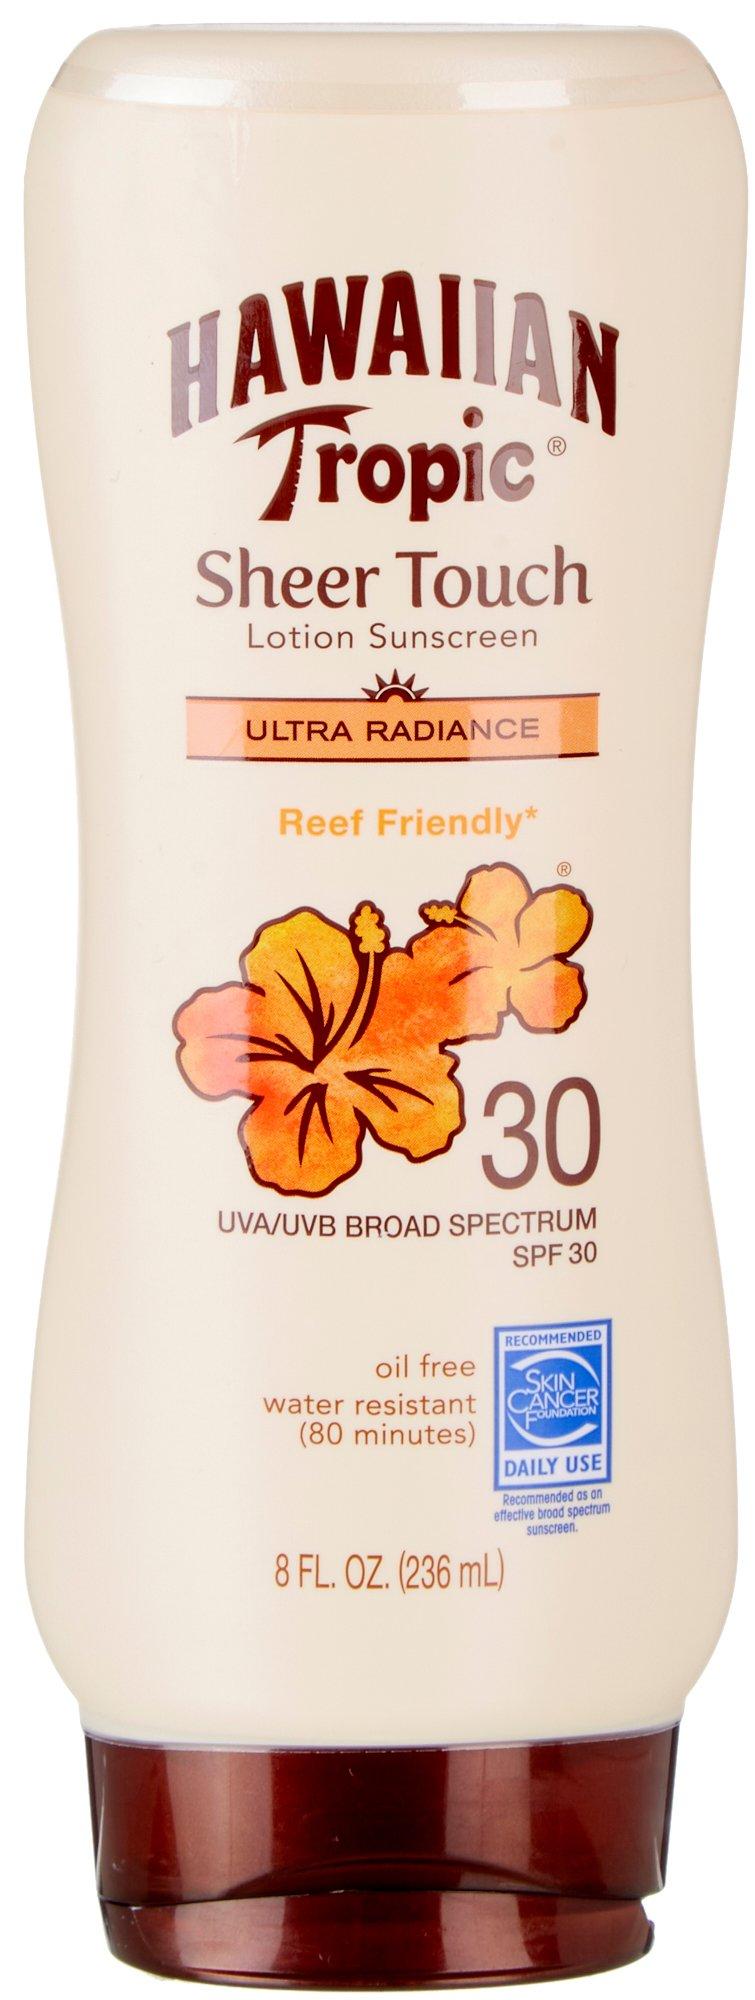 Sheer Touch Lotion Sunscreen 8 fl. oz.